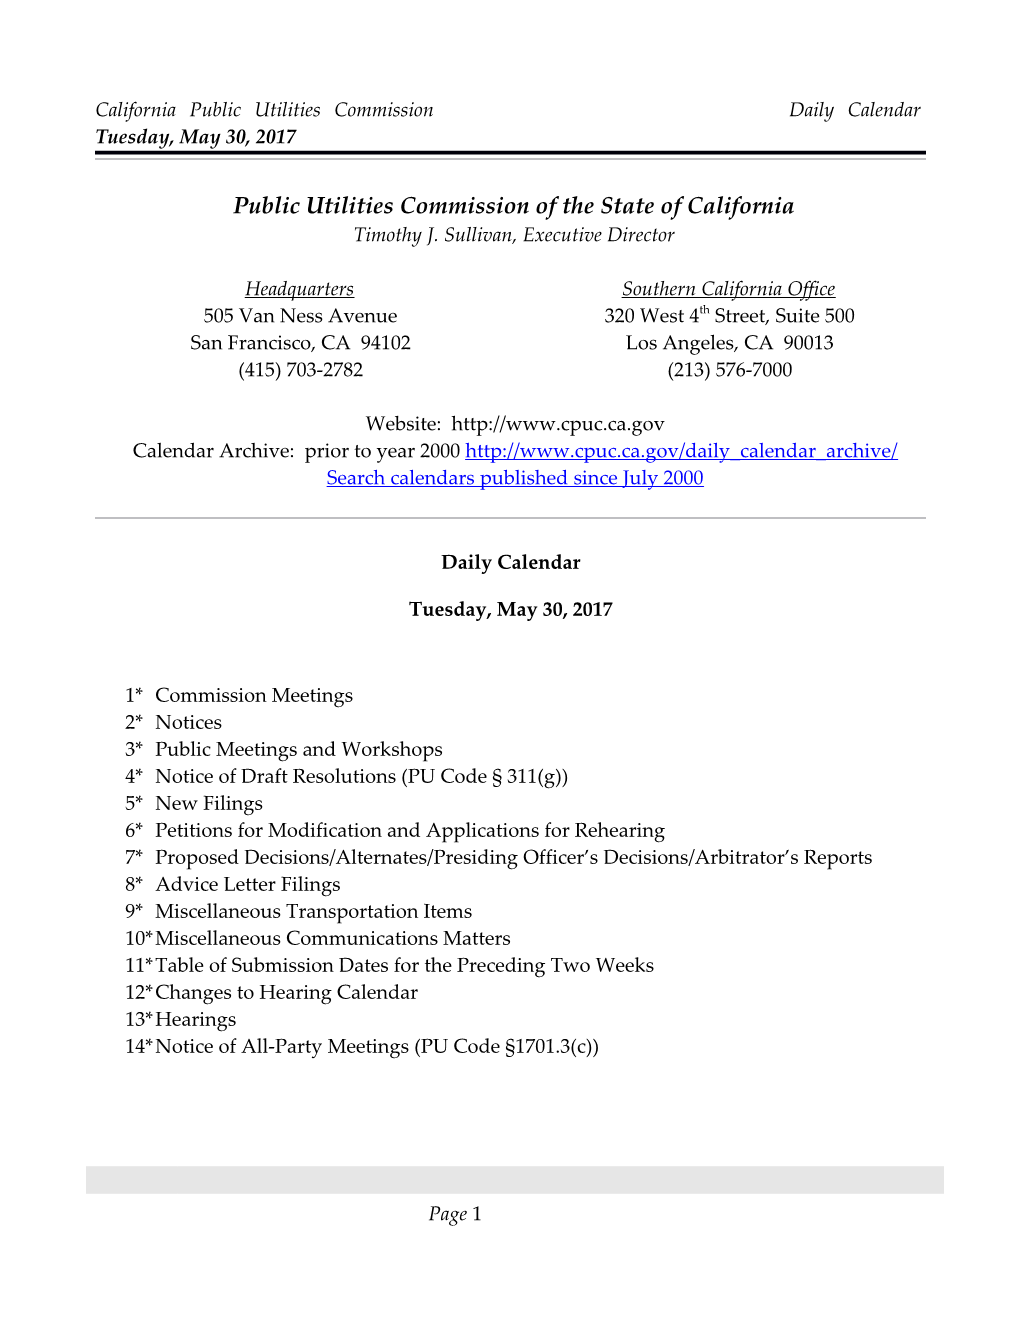 California Public Utilities Commission Daily Calendar Tuesday, May 30, 2017